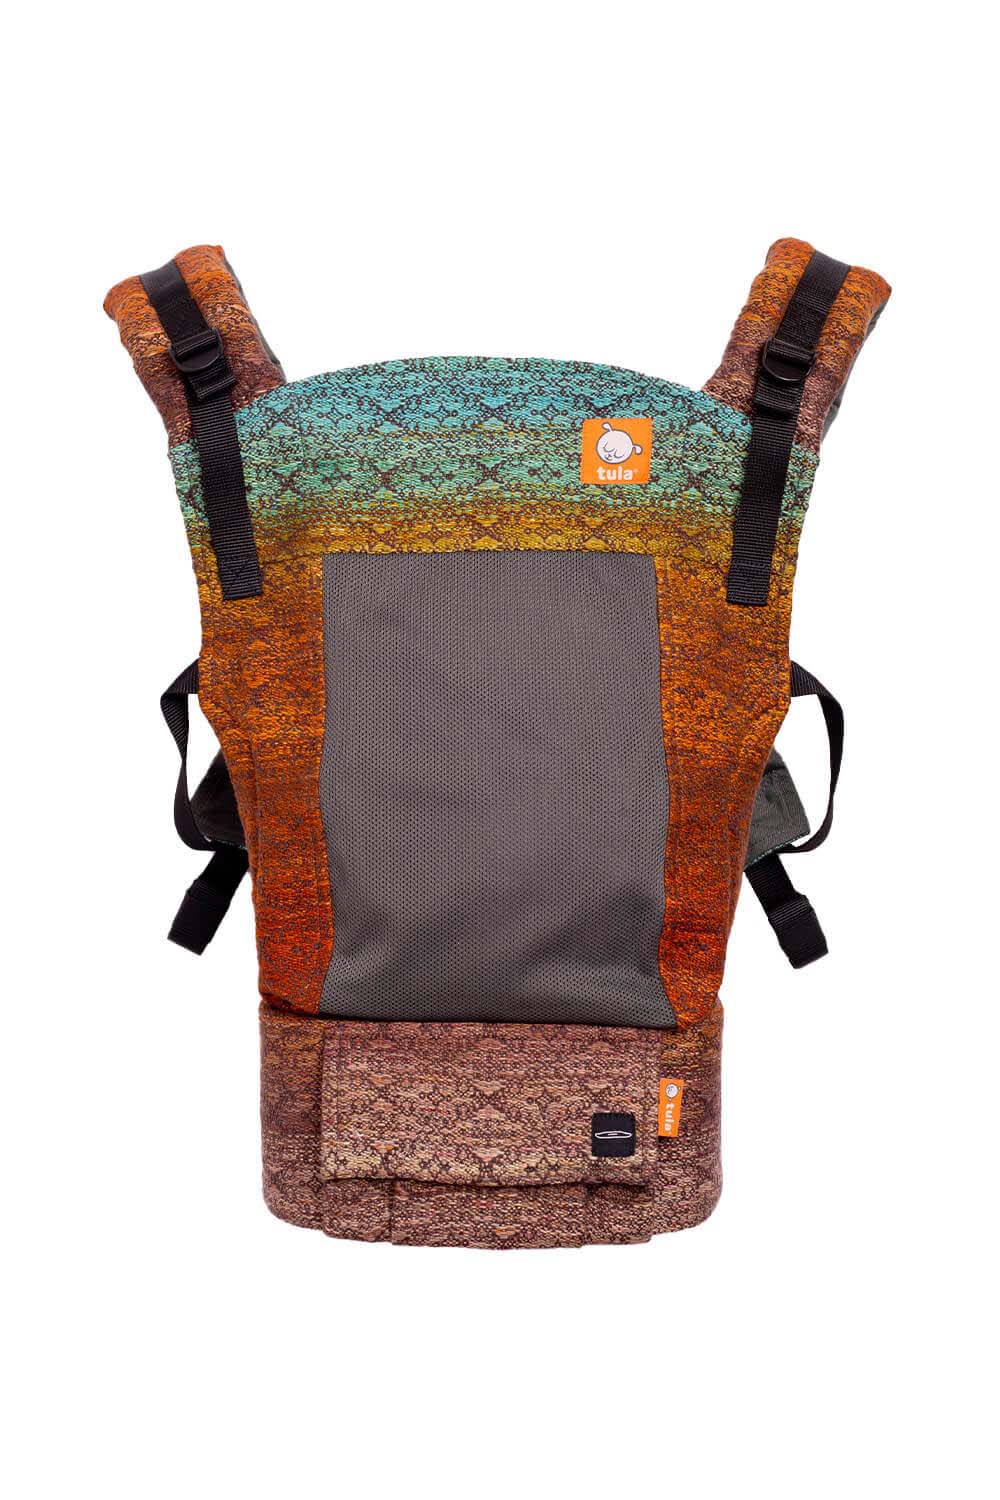 Canyon - Signature Handwoven Free-to-Grow Mesh Baby Carrier